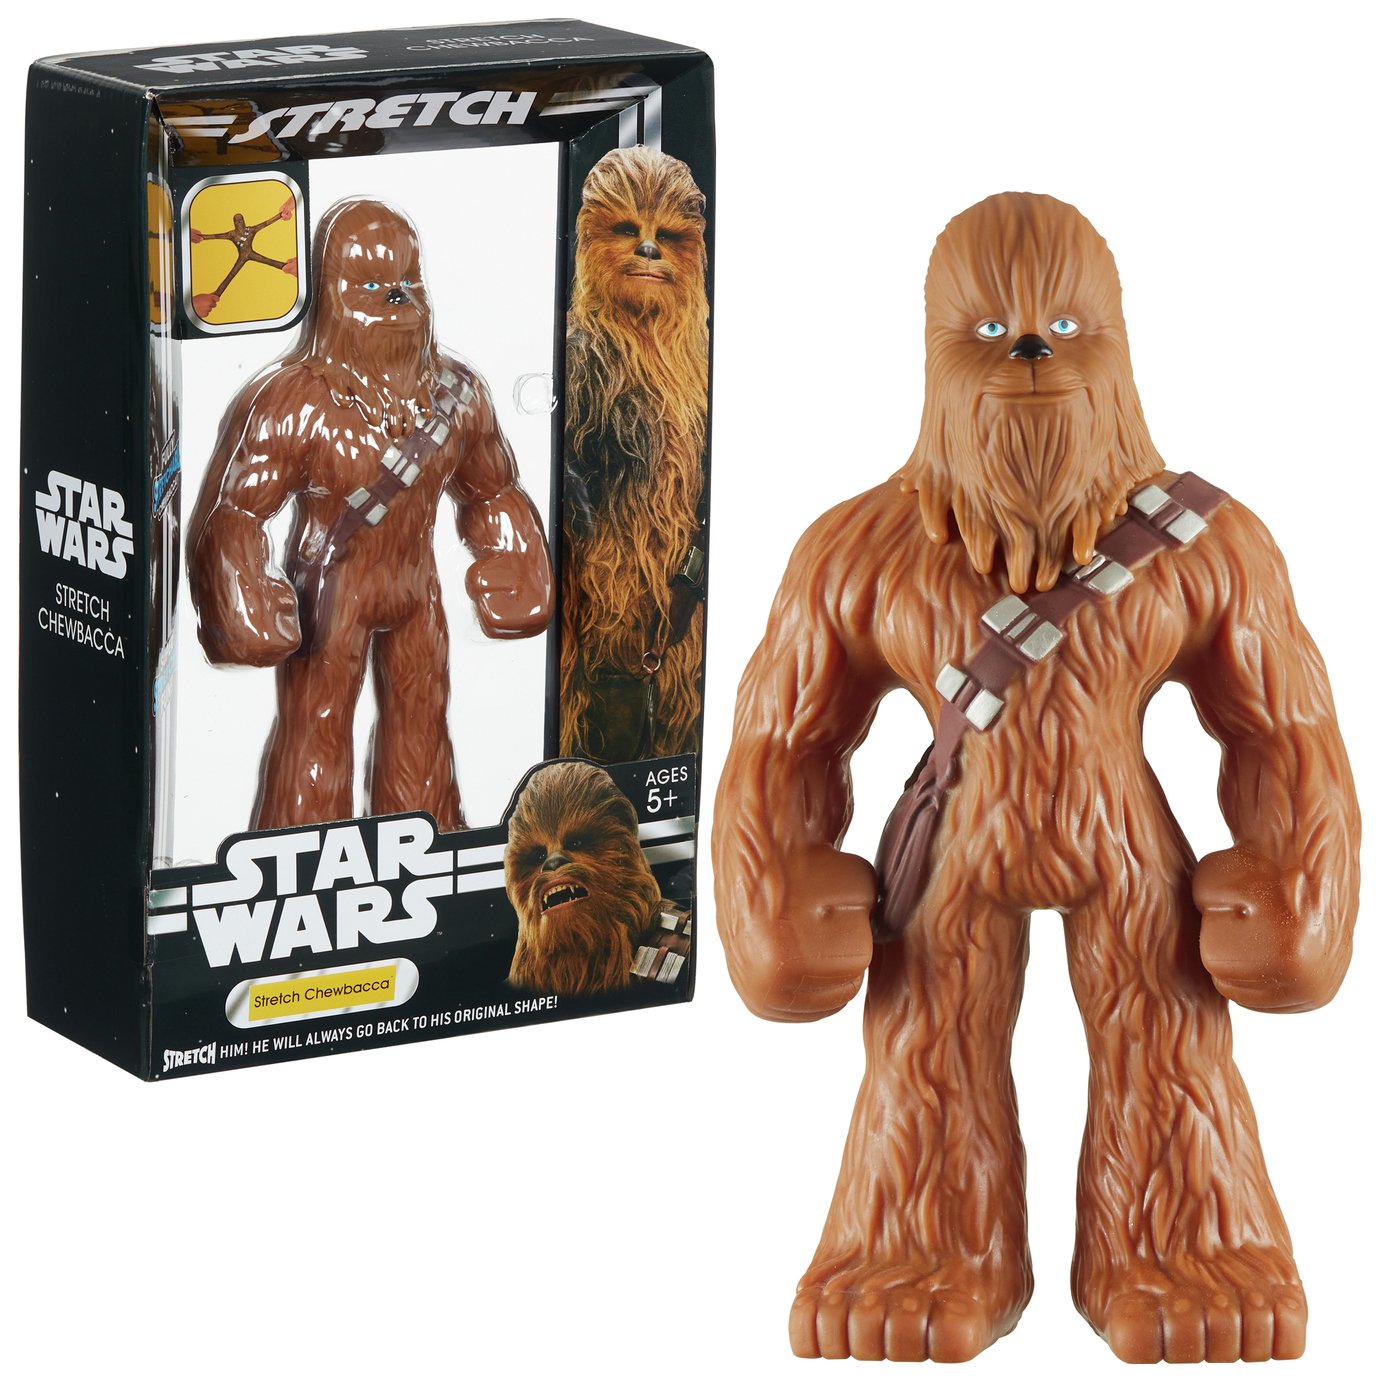 Stretch Star Wars Chewbacca Action Figure review